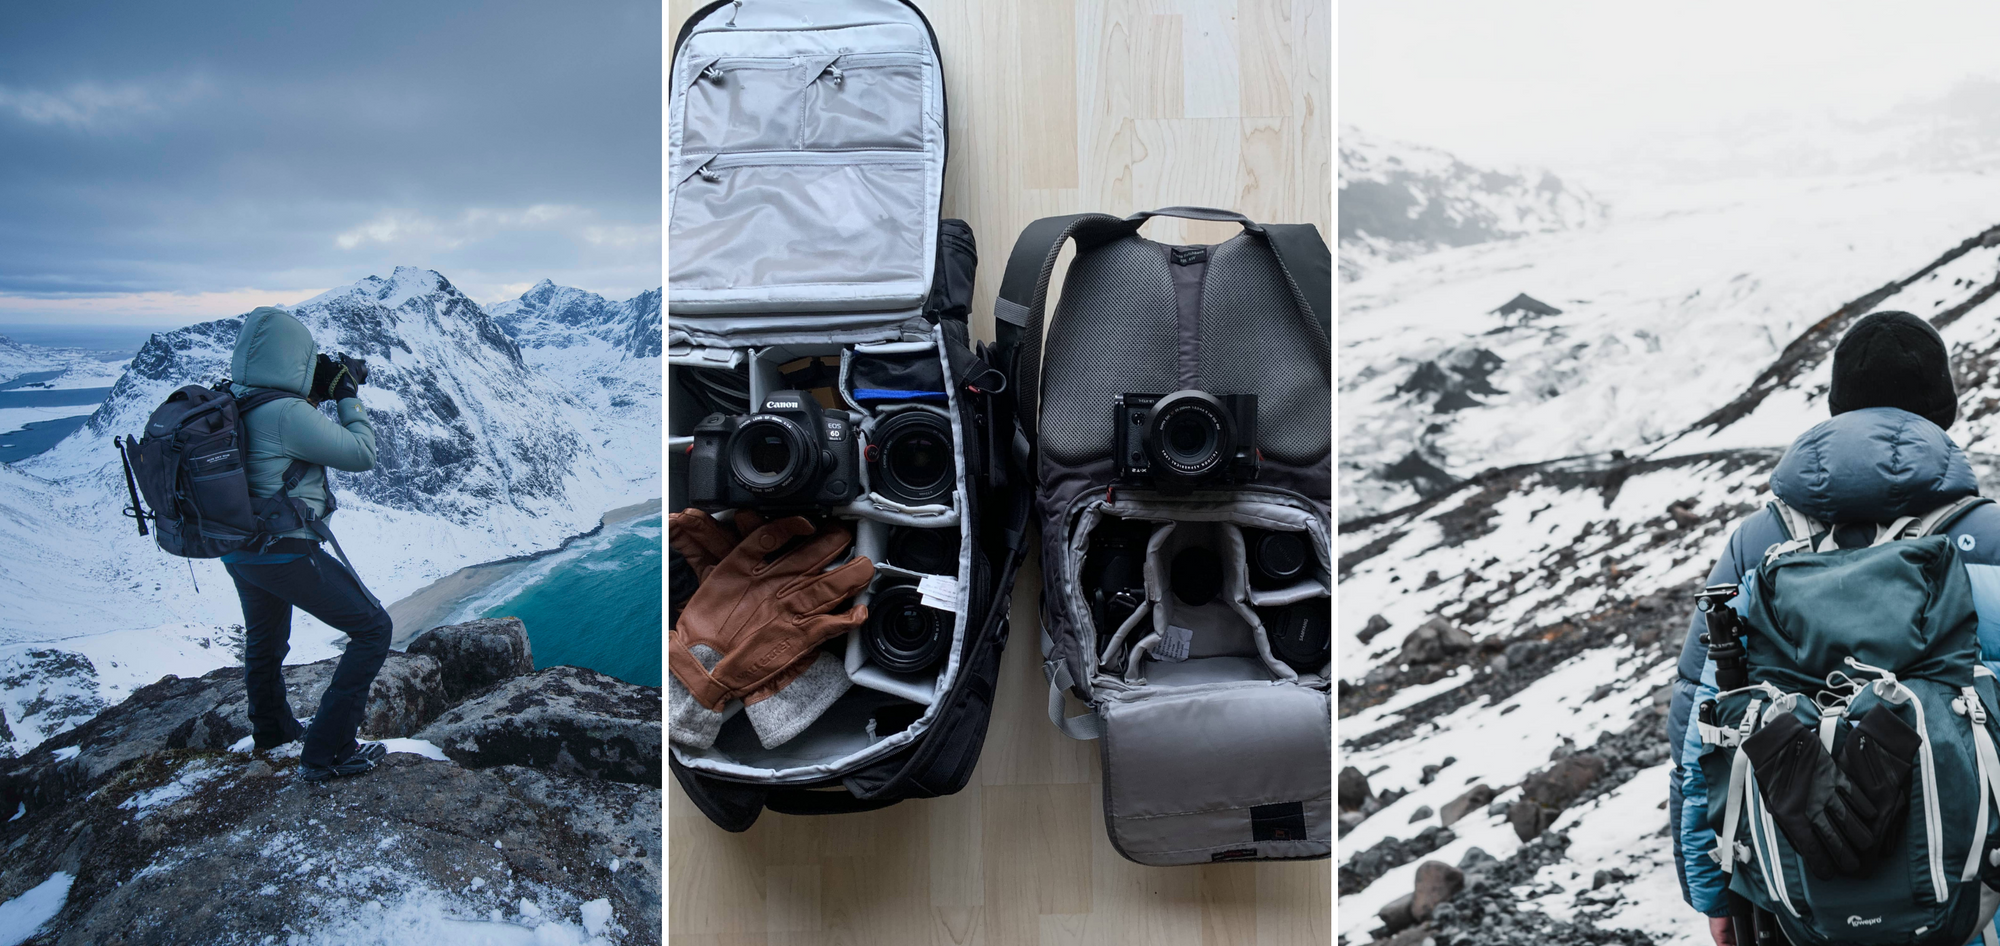 The Best Camera Bag for Winter Photography, According to the Pros